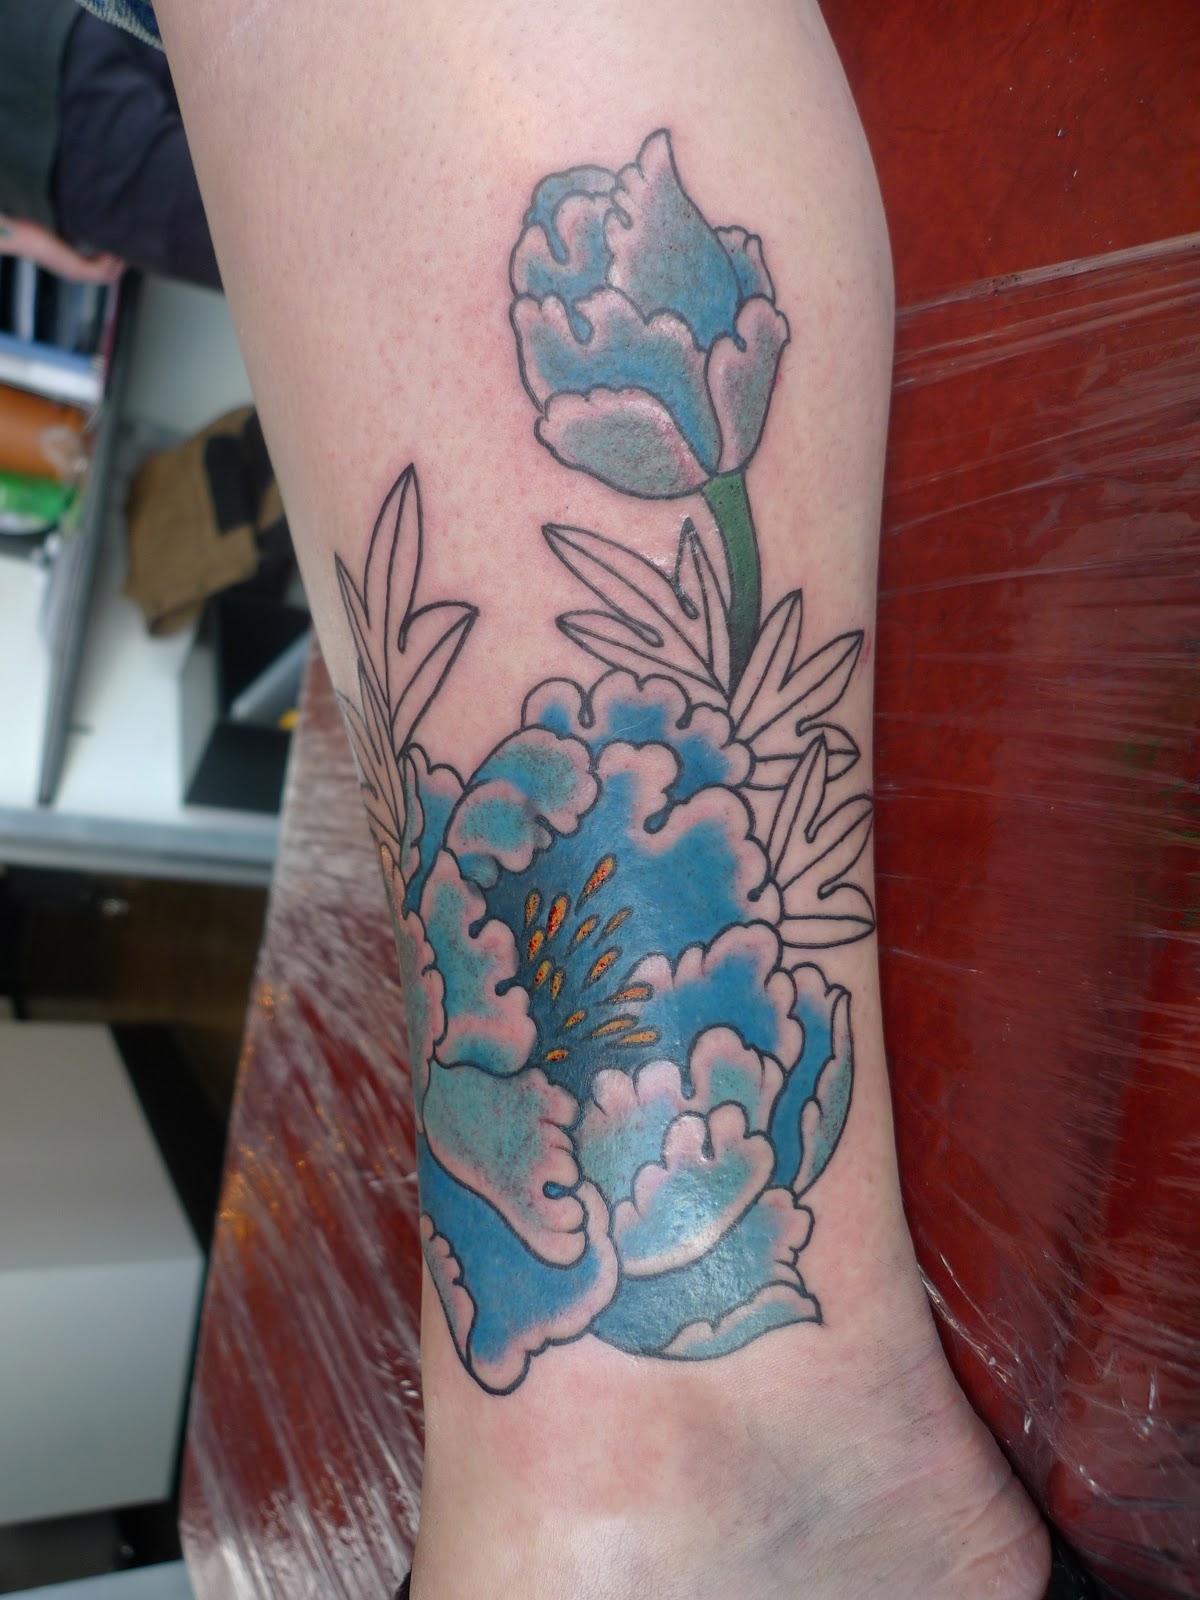 holy skin tattoo: Peony Cover up in progress.